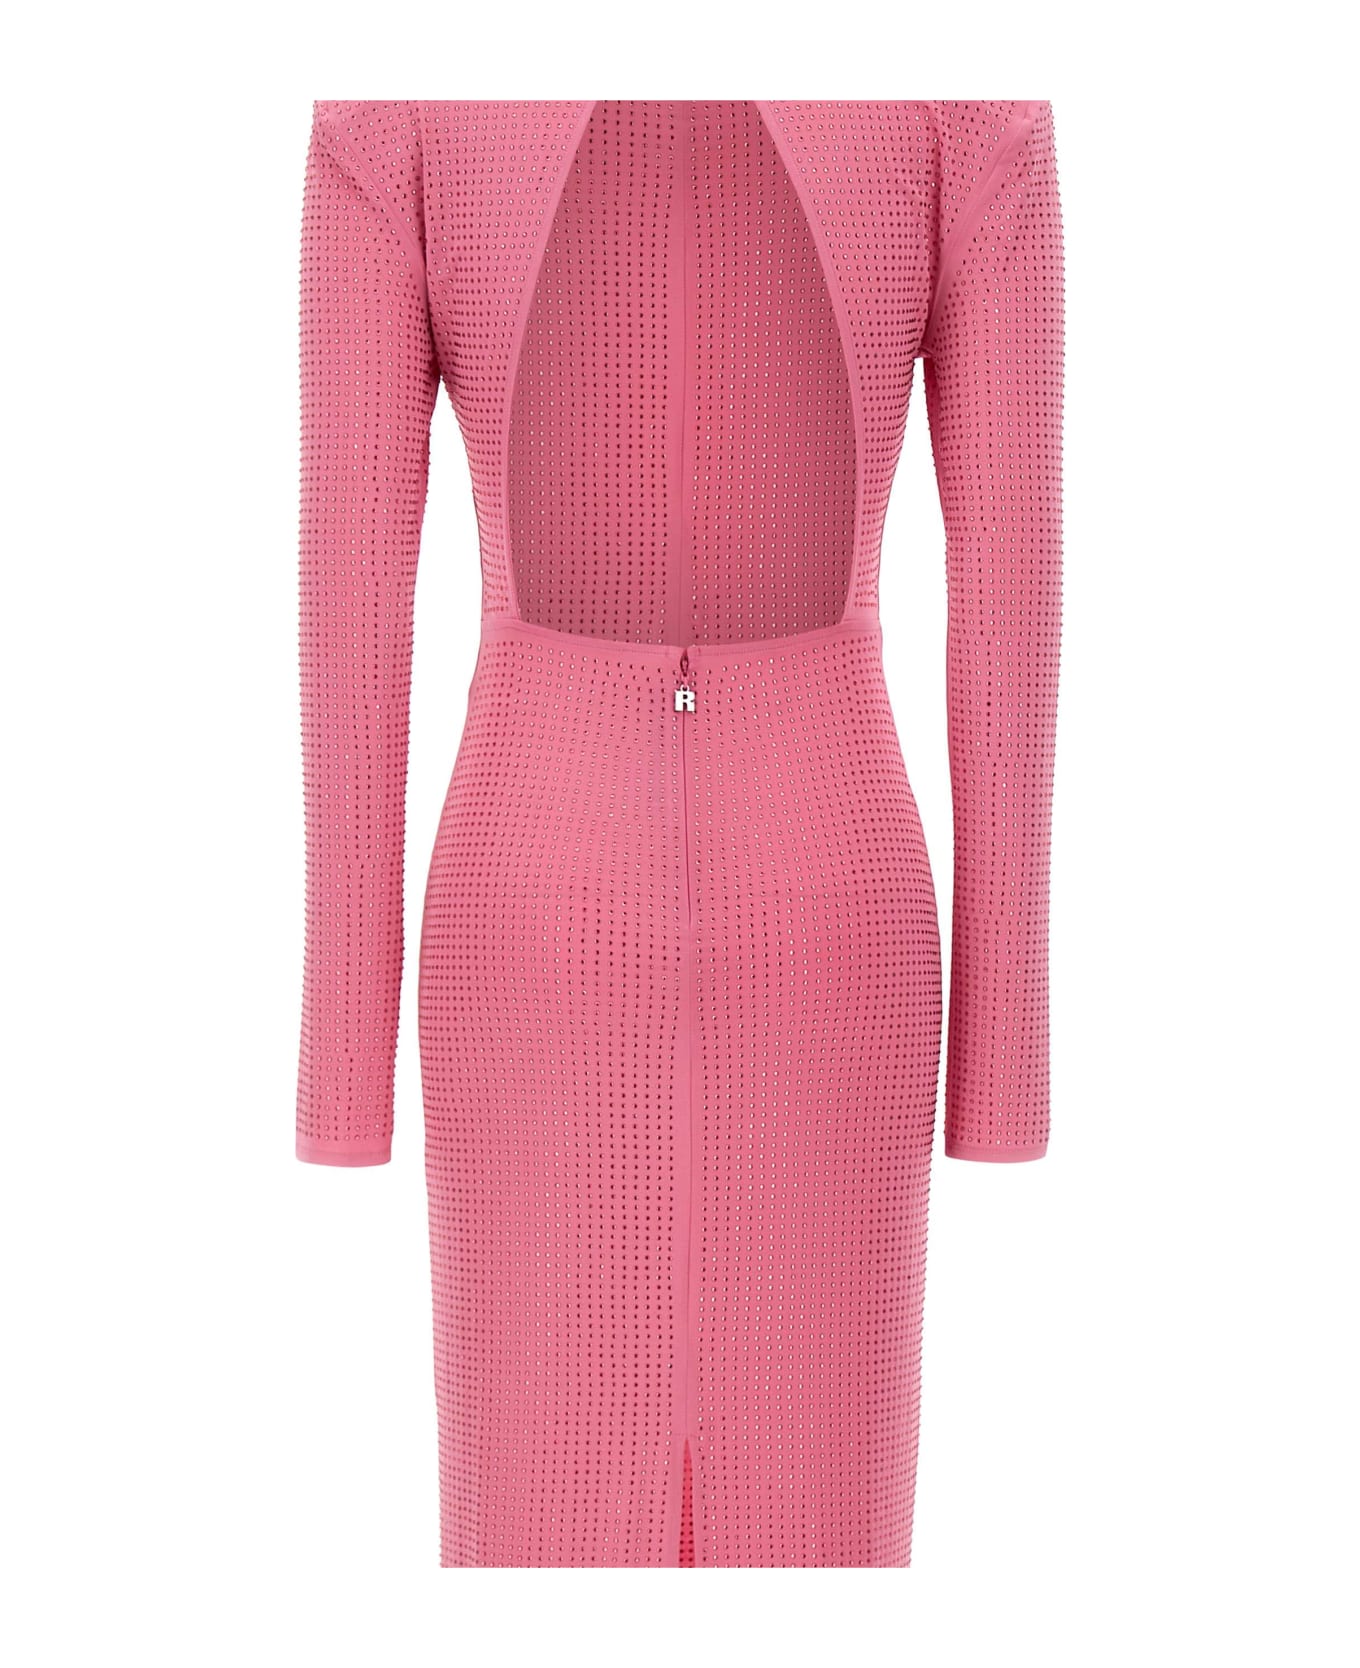 Rotate by Birger Christensen "embellished Fitted" Dress - PINK